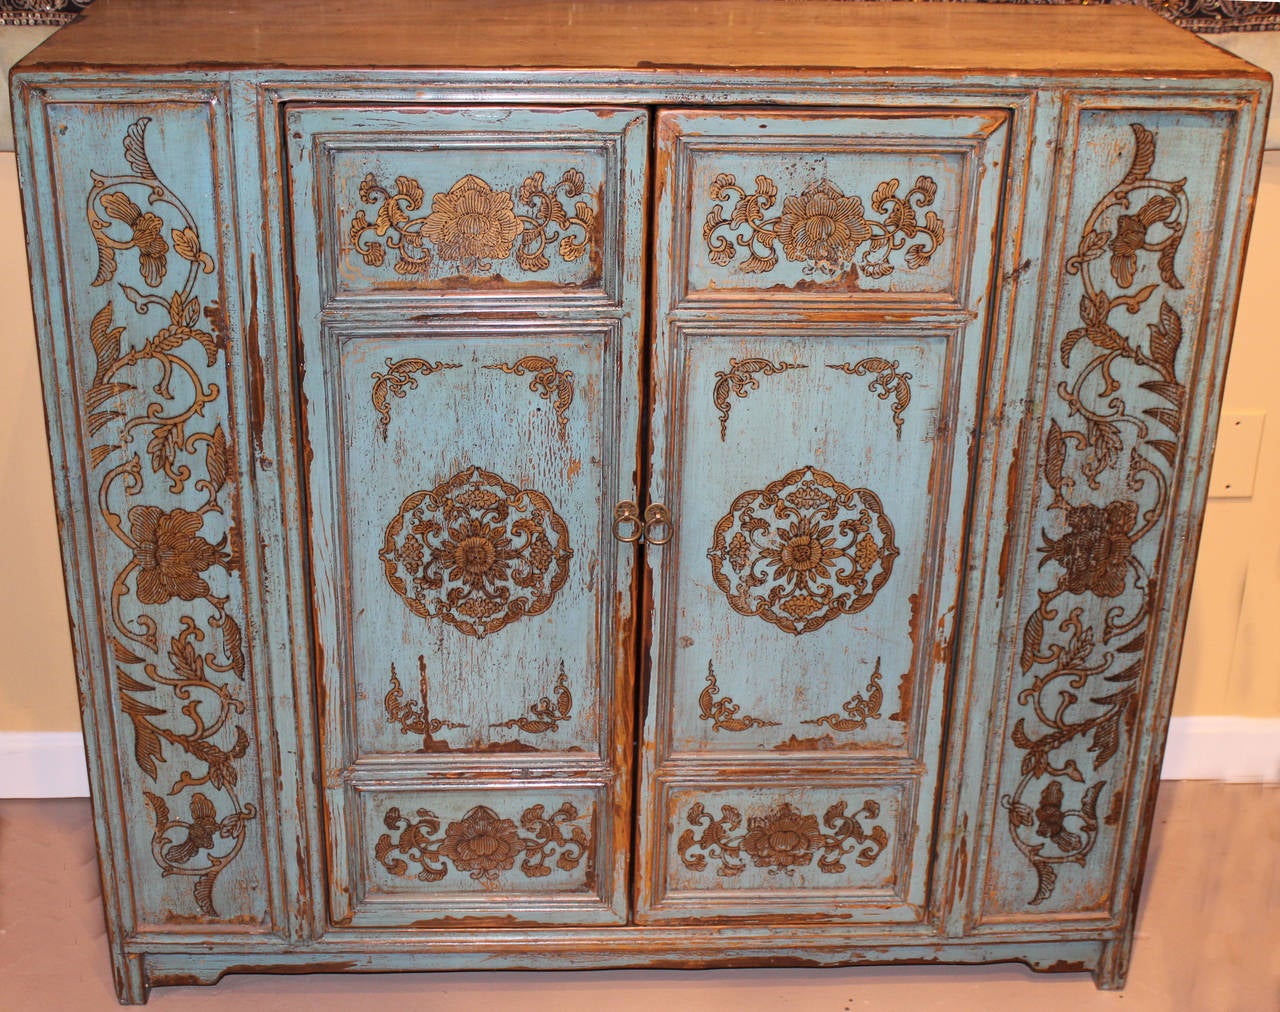 A paint decorated Chinese wooden two door cabinet, opening to a single interior shelf. The front panels are painted pale blue with gold and black foliate decoration, with ivory colored sides and top. A great piece and wonderful size. Probably dating